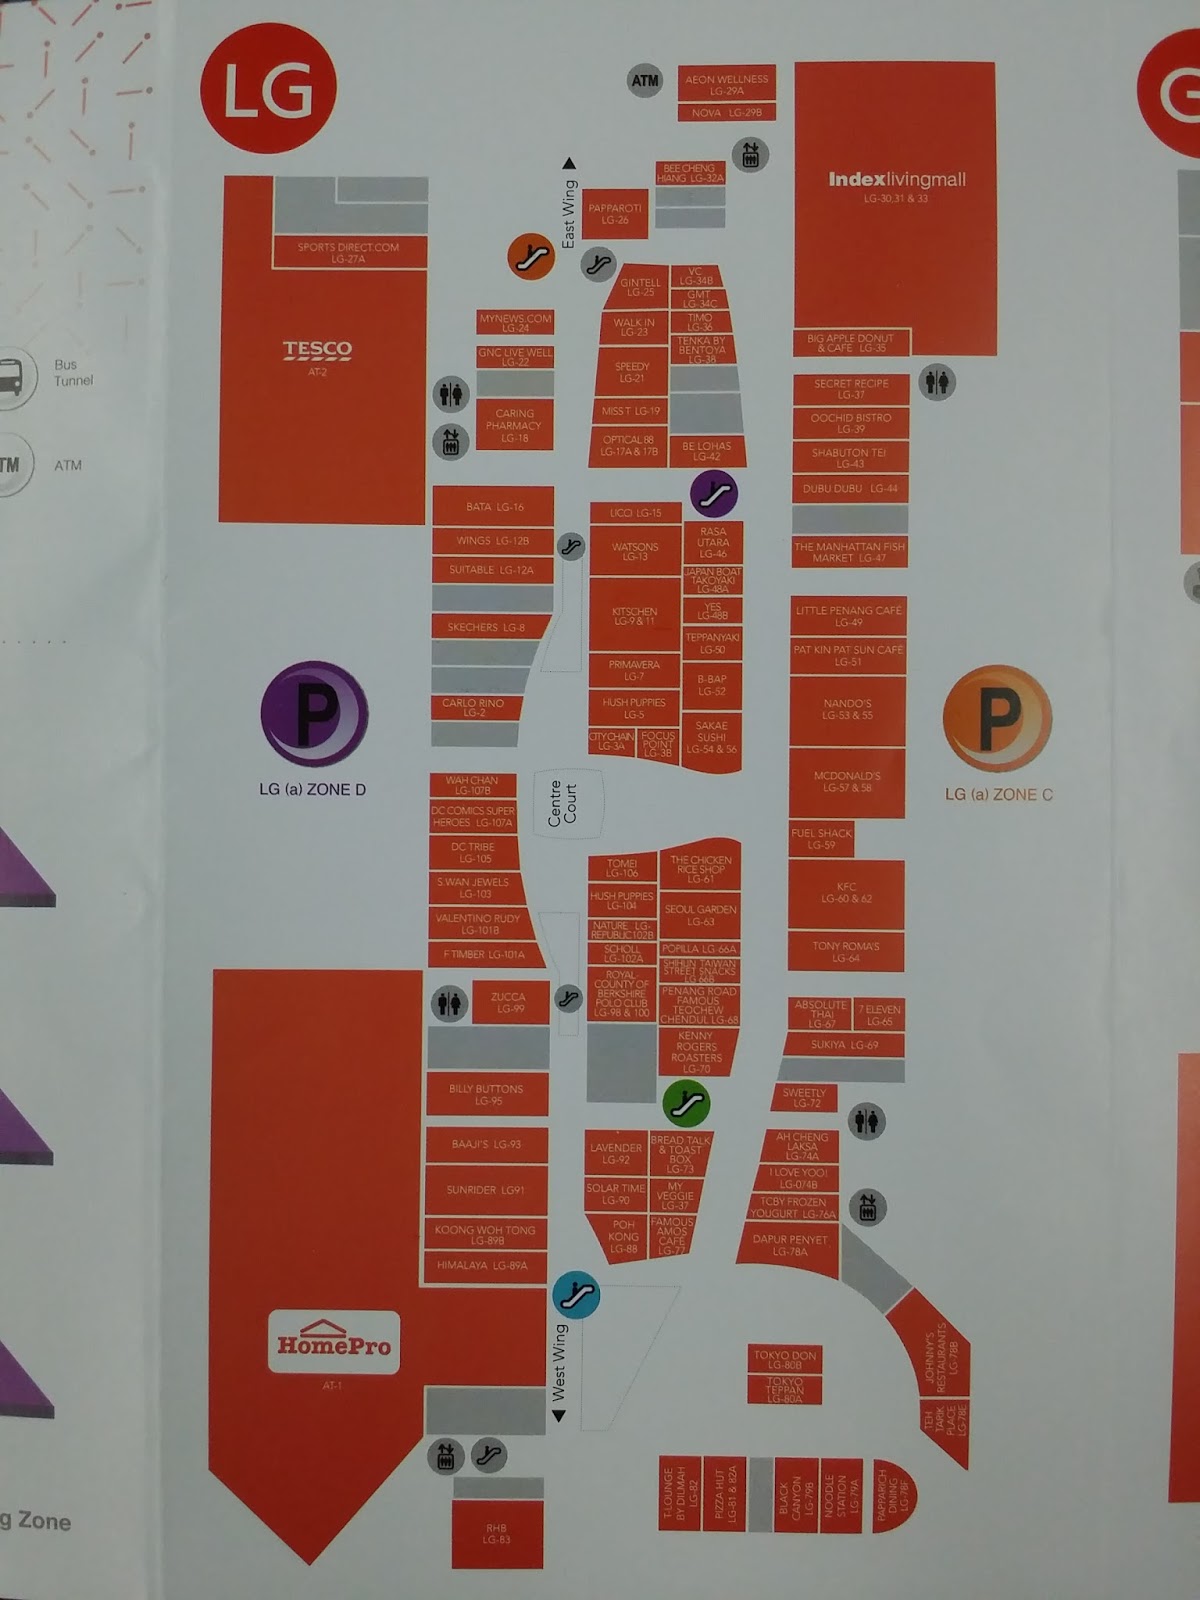 simplyApost: IOI City Mall directory and floor plan